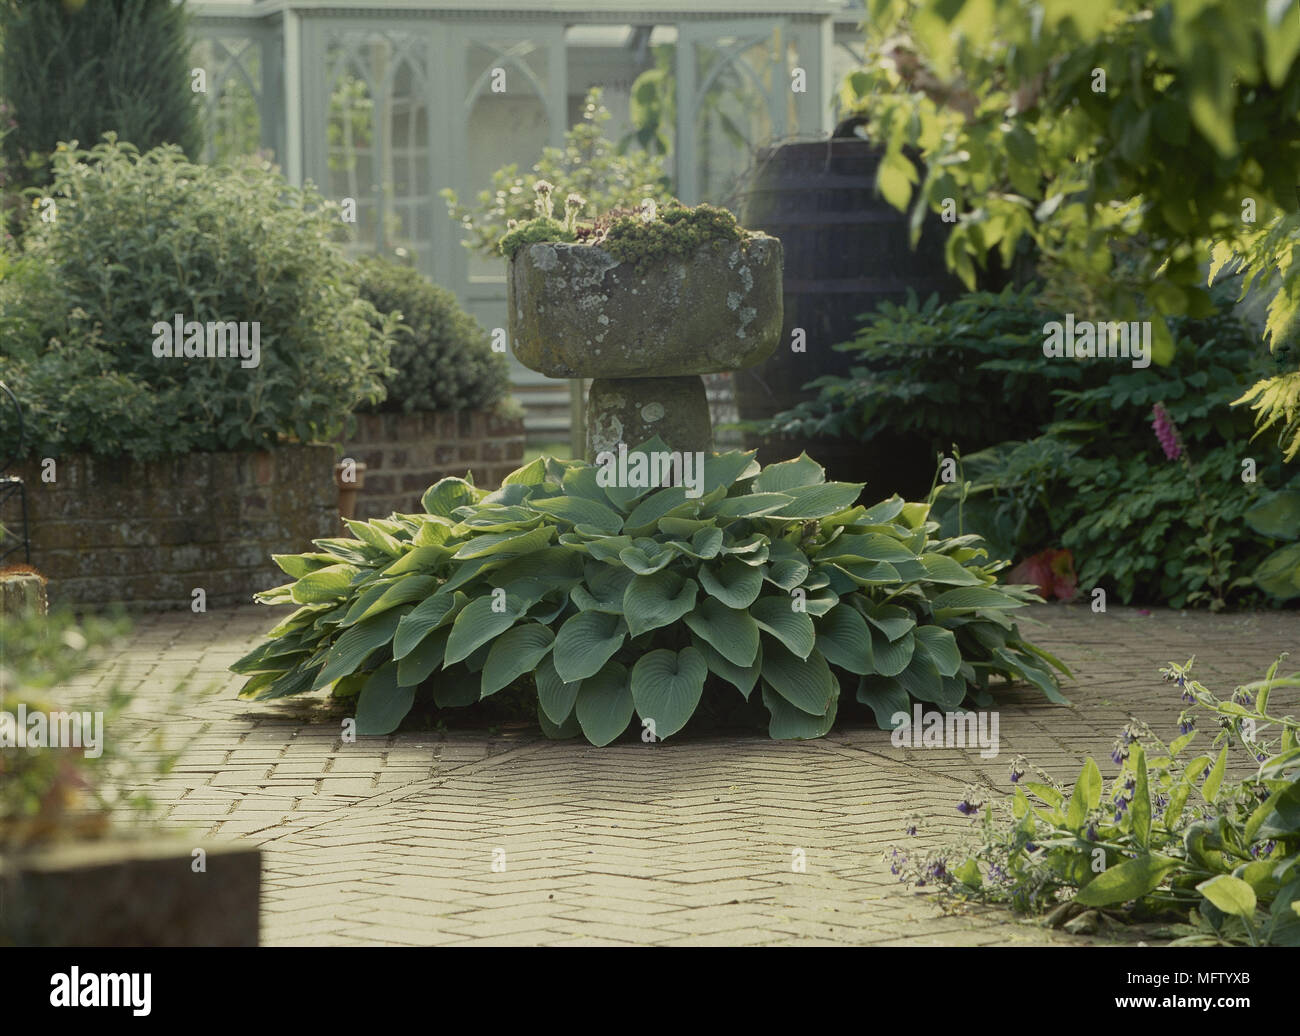 Garden feature ancient touf paved area flowers and plants  Gardens detail stone planter rustic hostas paving features focal points Stock Photo